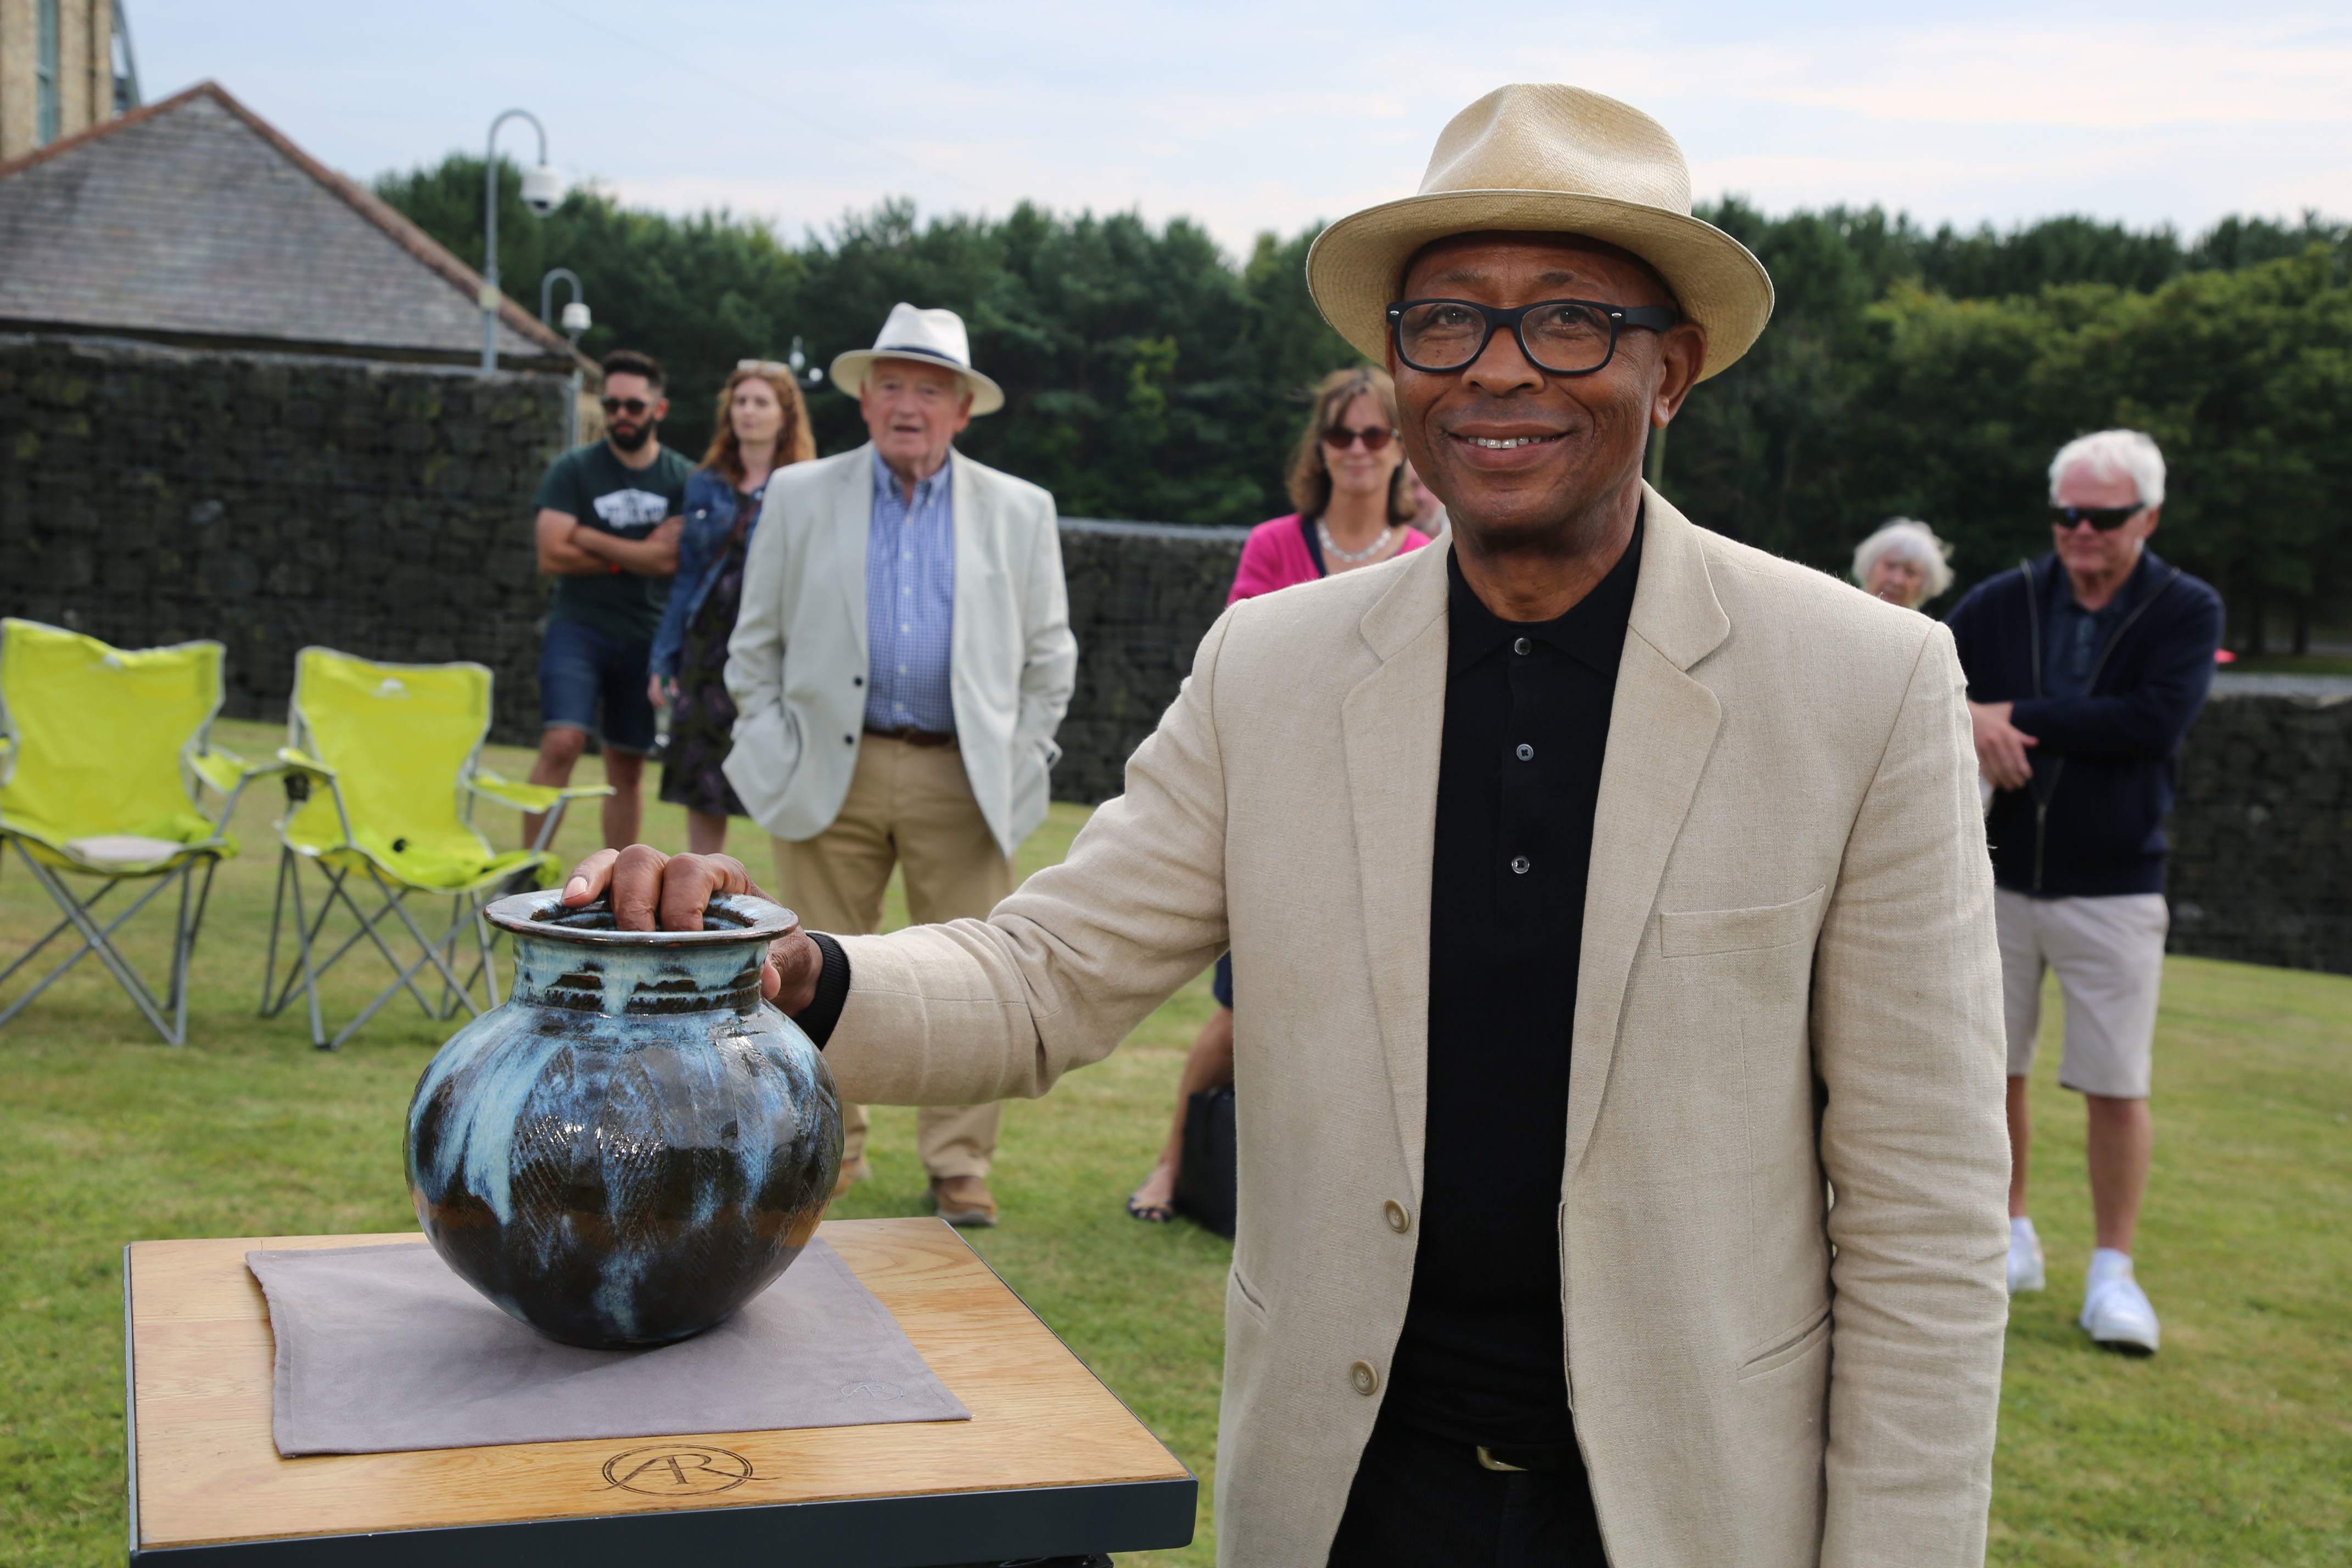 Archer-Morgan on the Antiques Roadshow with a ceramic pot